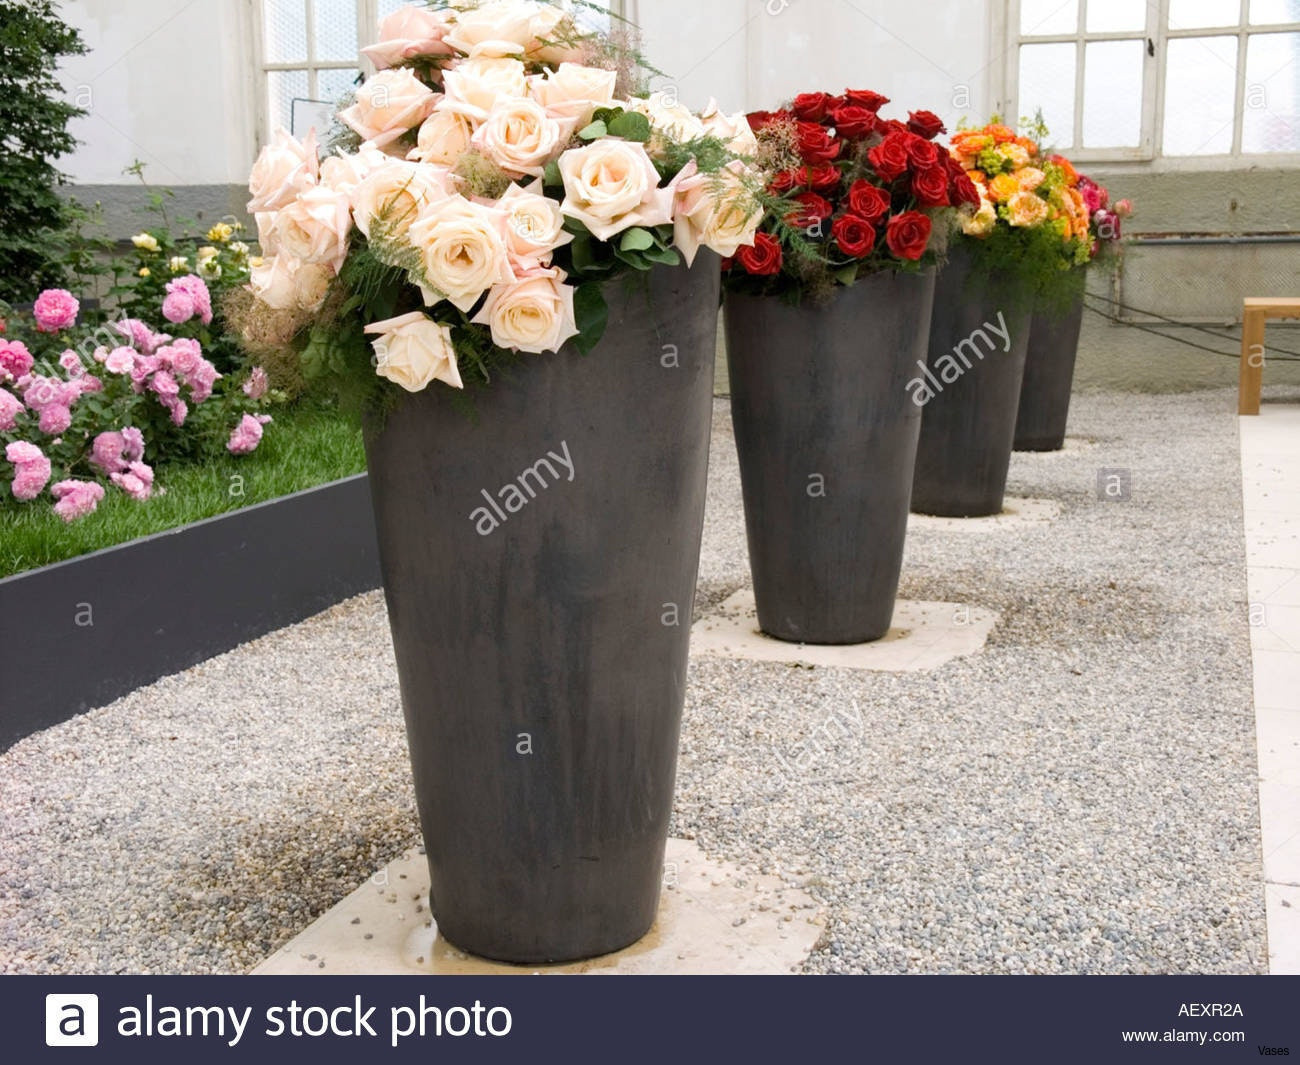 27 Lovable Galvanized Metal Vases wholesale 2024 free download galvanized metal vases wholesale of wide glass vase pictures living room vases wholesale new h vases big for wide glass vase image buy used wedding decor awesome articles with flower vases f